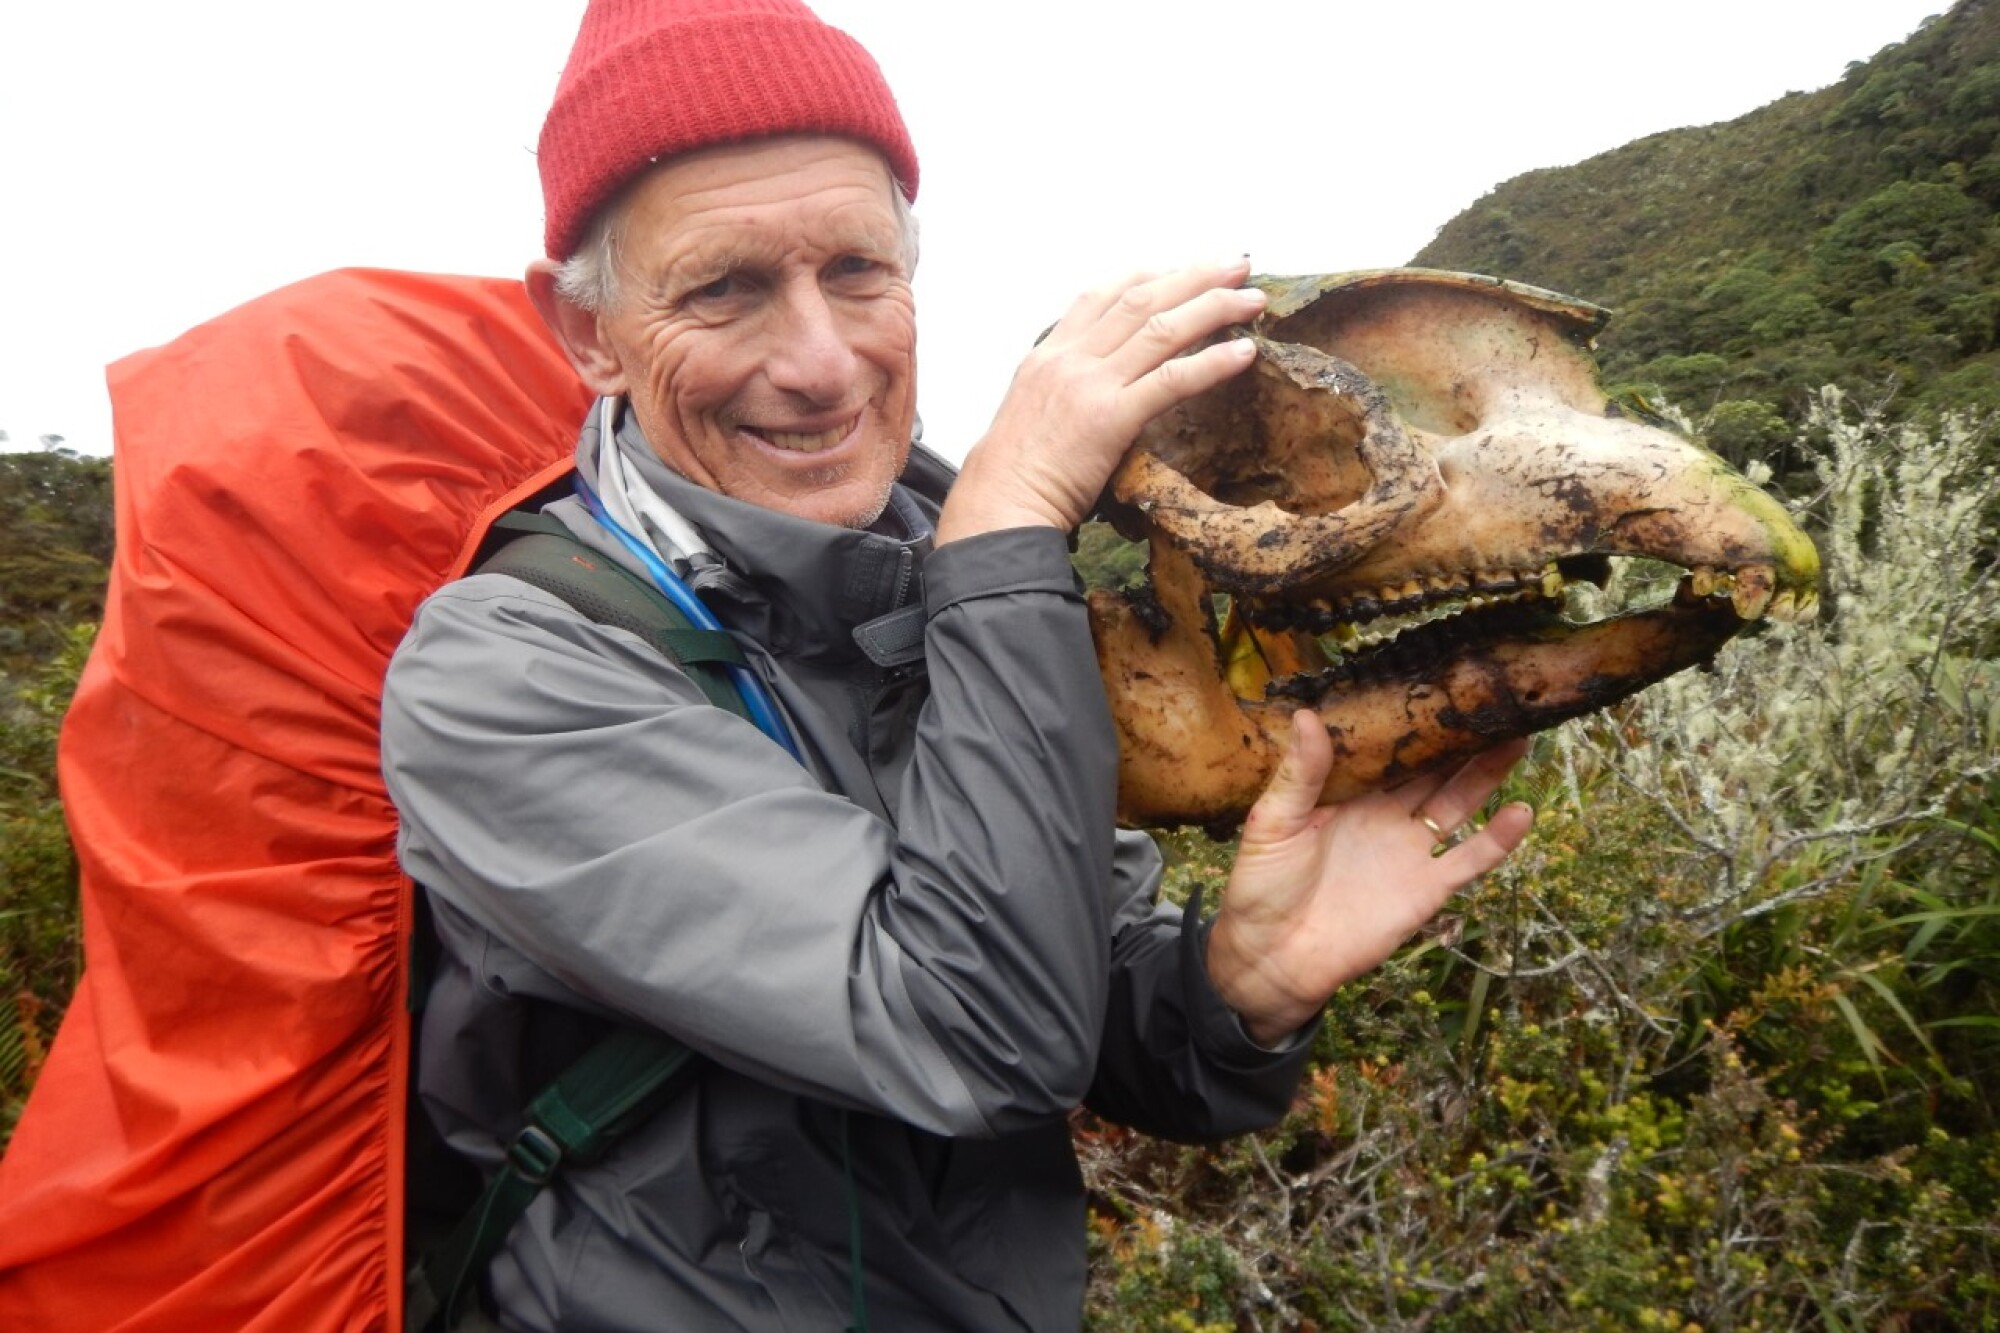 Mike Mooring, a biologist at Point Loma Nazarene University, holds the skeletal head of a tapir he found on a research trip